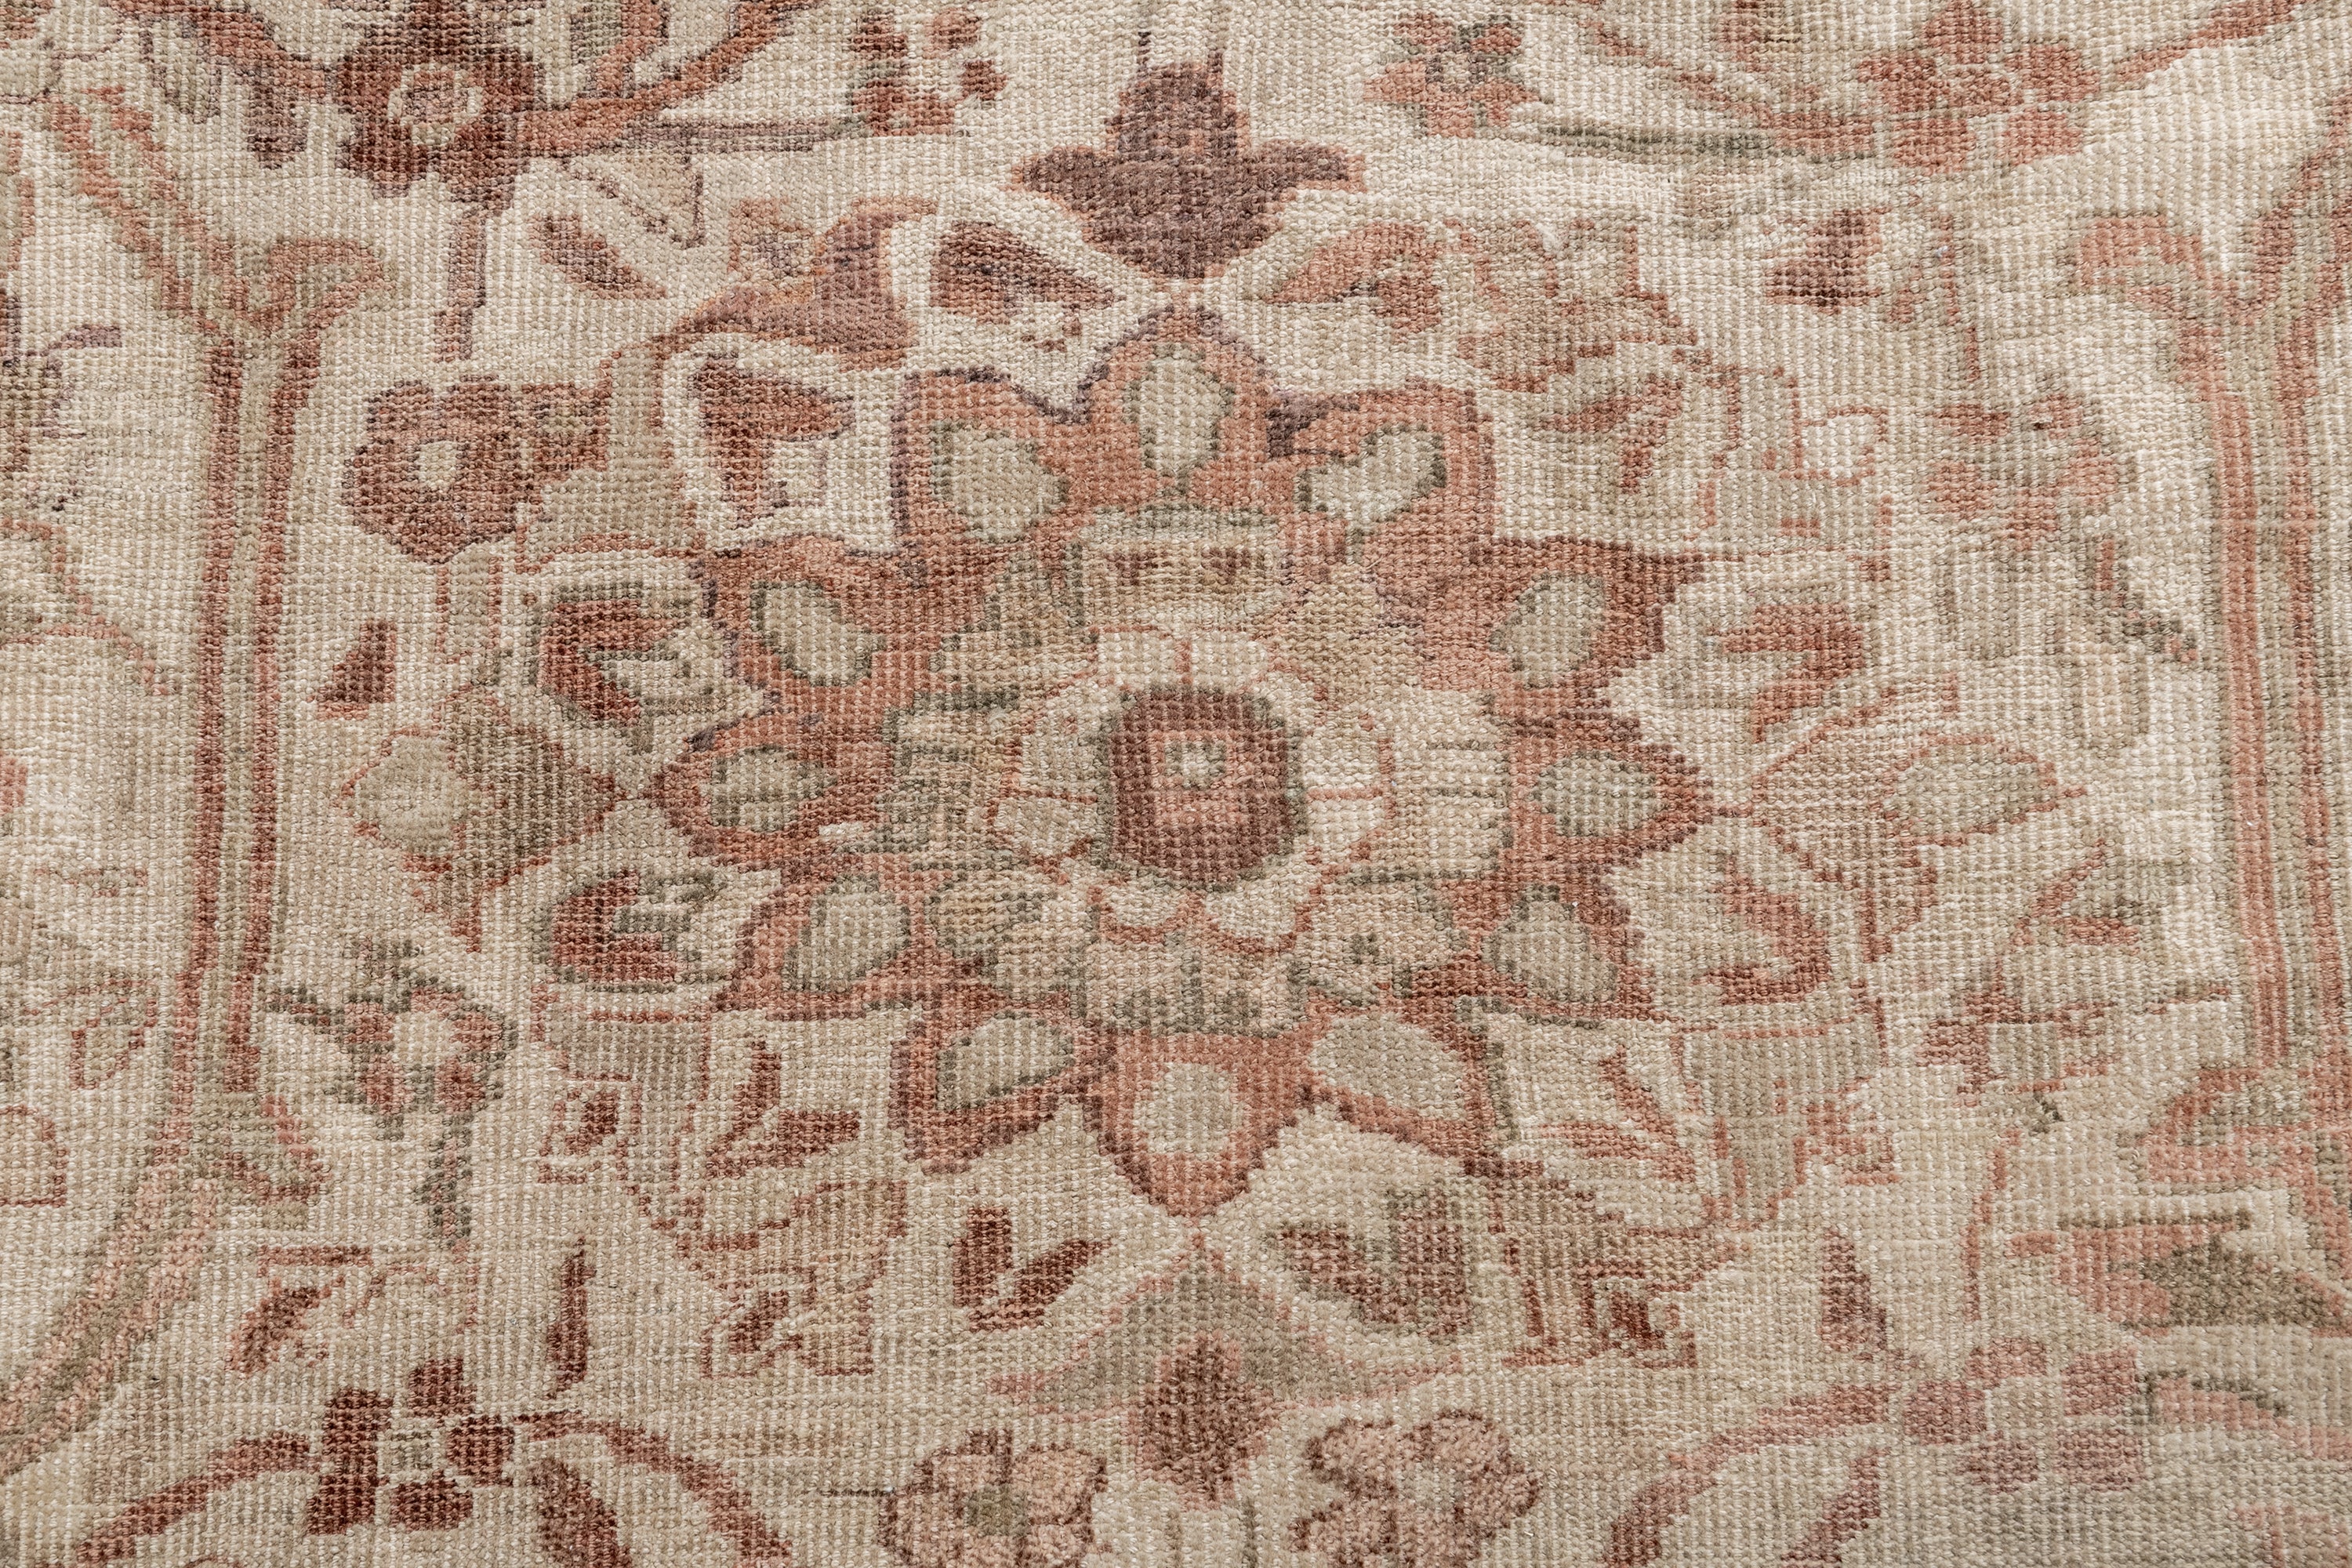 SULTANABAD RUG, AR31072/7322, WEST PERSIA, 13'7" X 19'8" - thumbnail 6